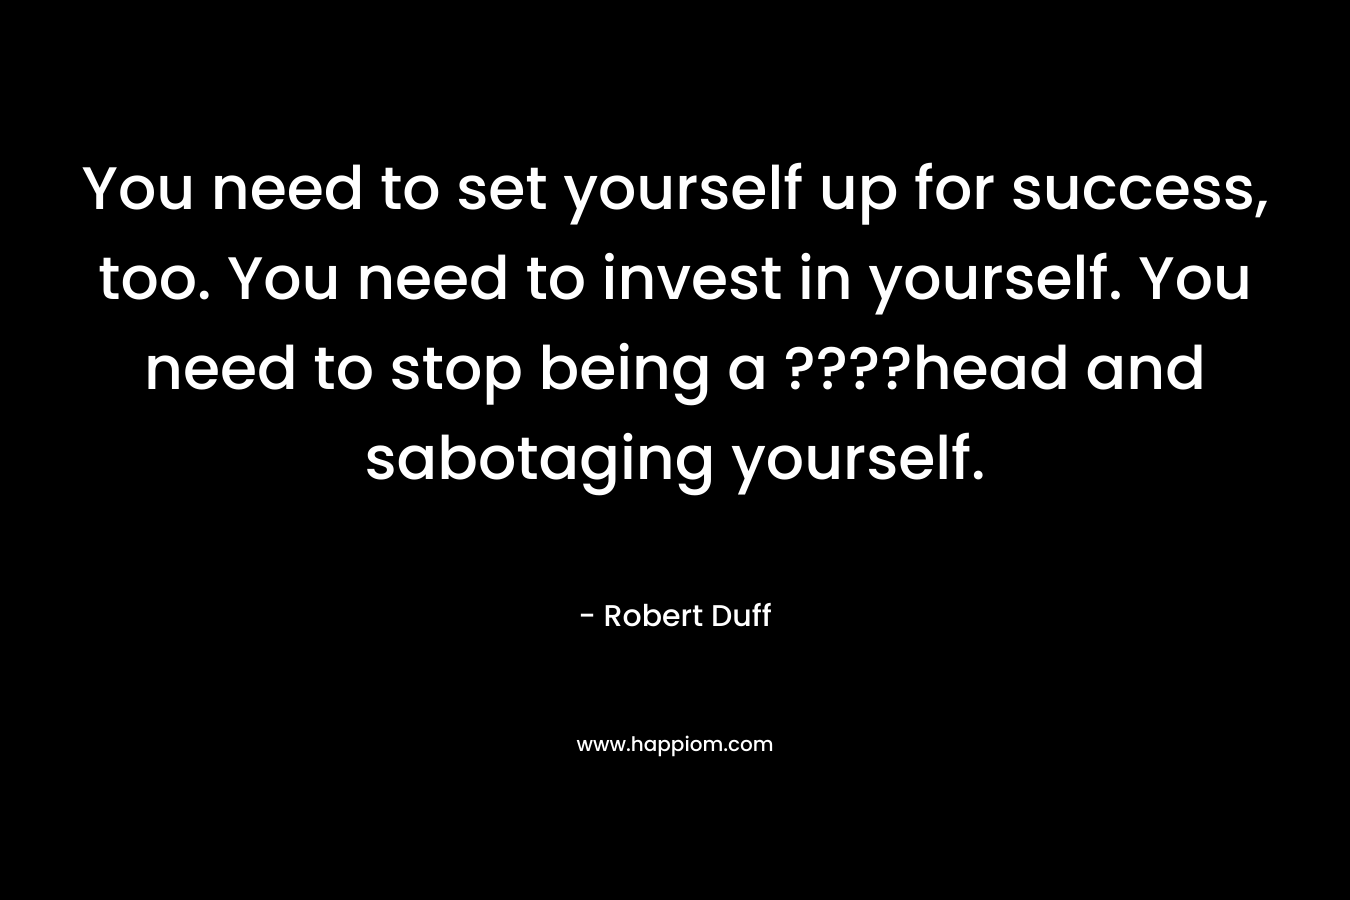 You need to set yourself up for success, too. You need to invest in yourself. You need to stop being a ????head and sabotaging yourself. – Robert Duff